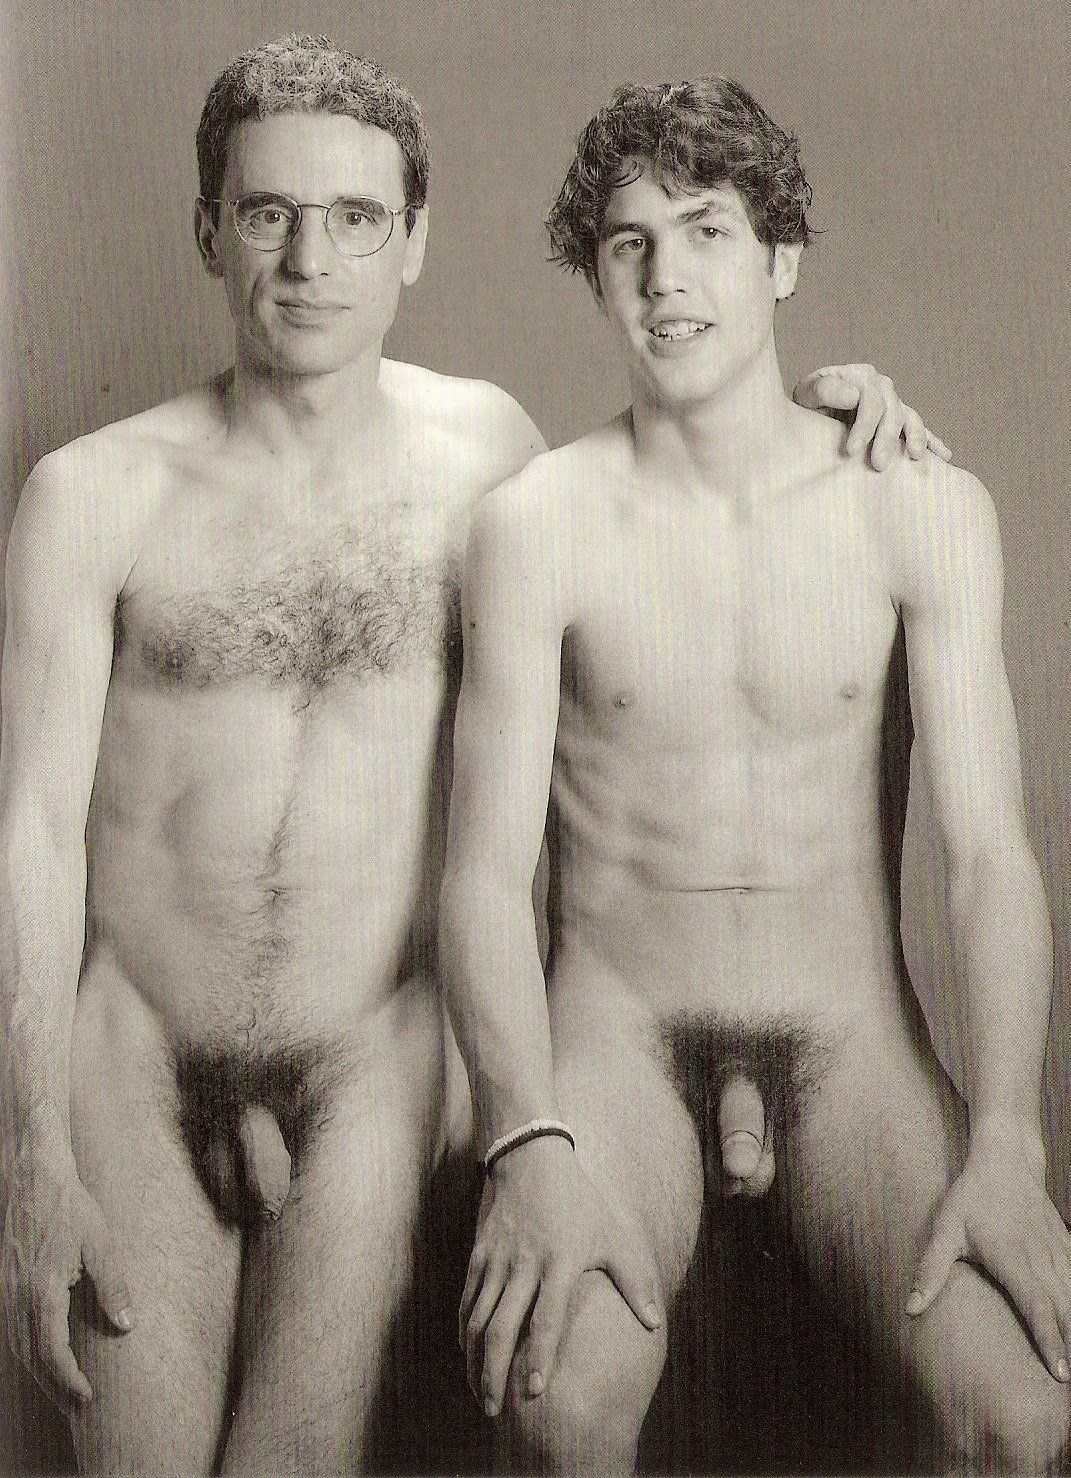 Real Father And Son Naked